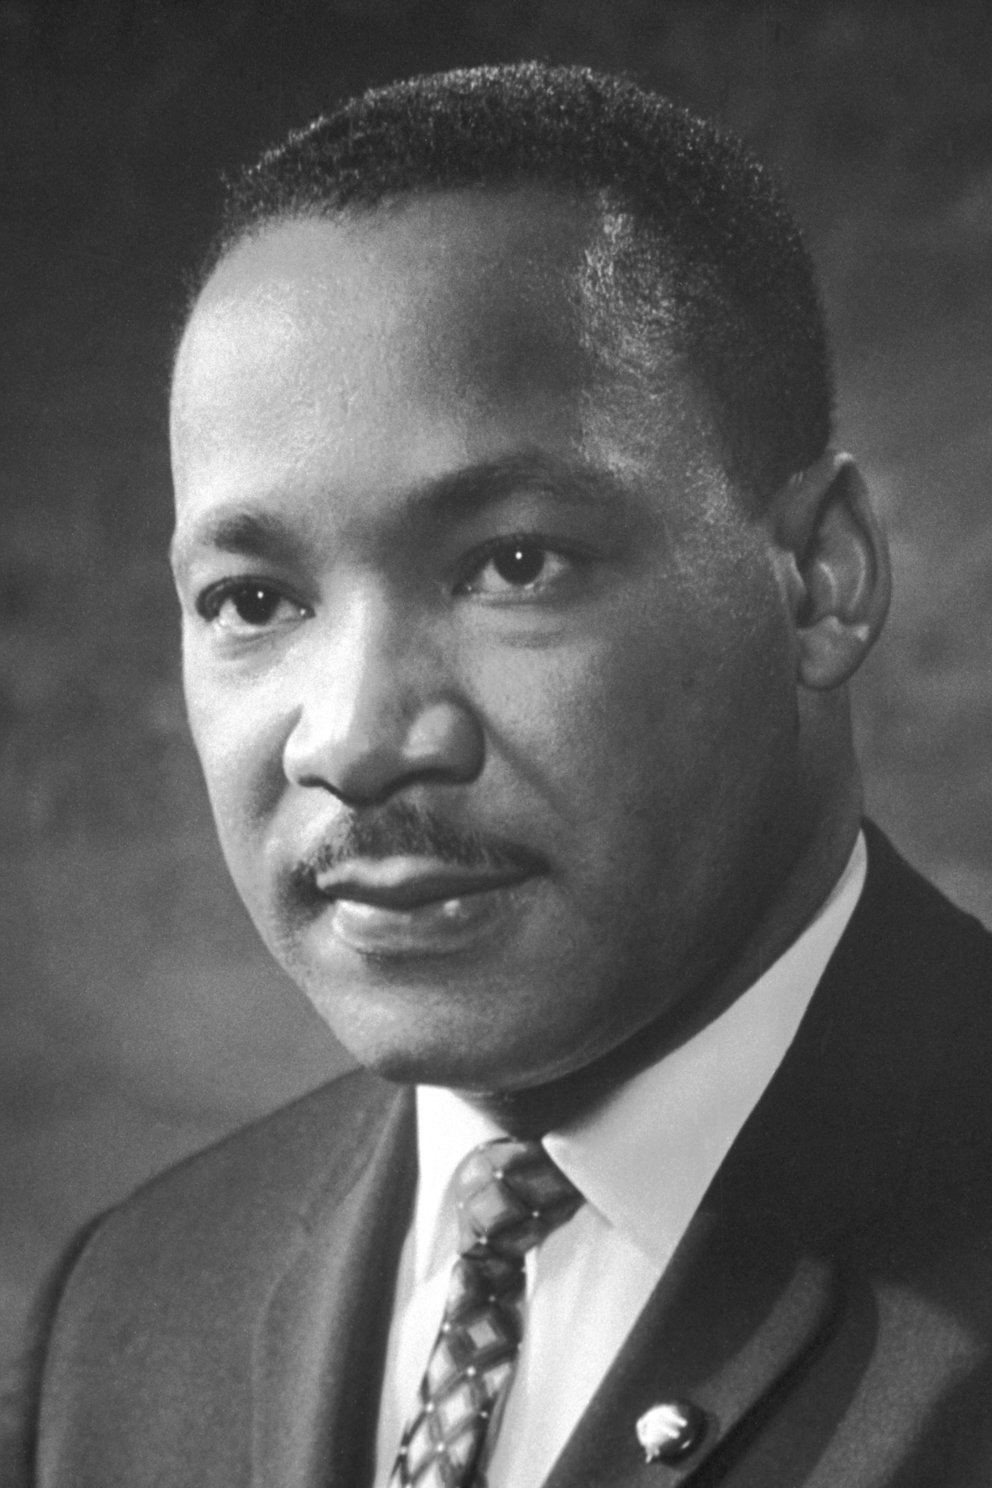 Black and white photo of Dr. Martin Luther King Jr. in a suit and tie.